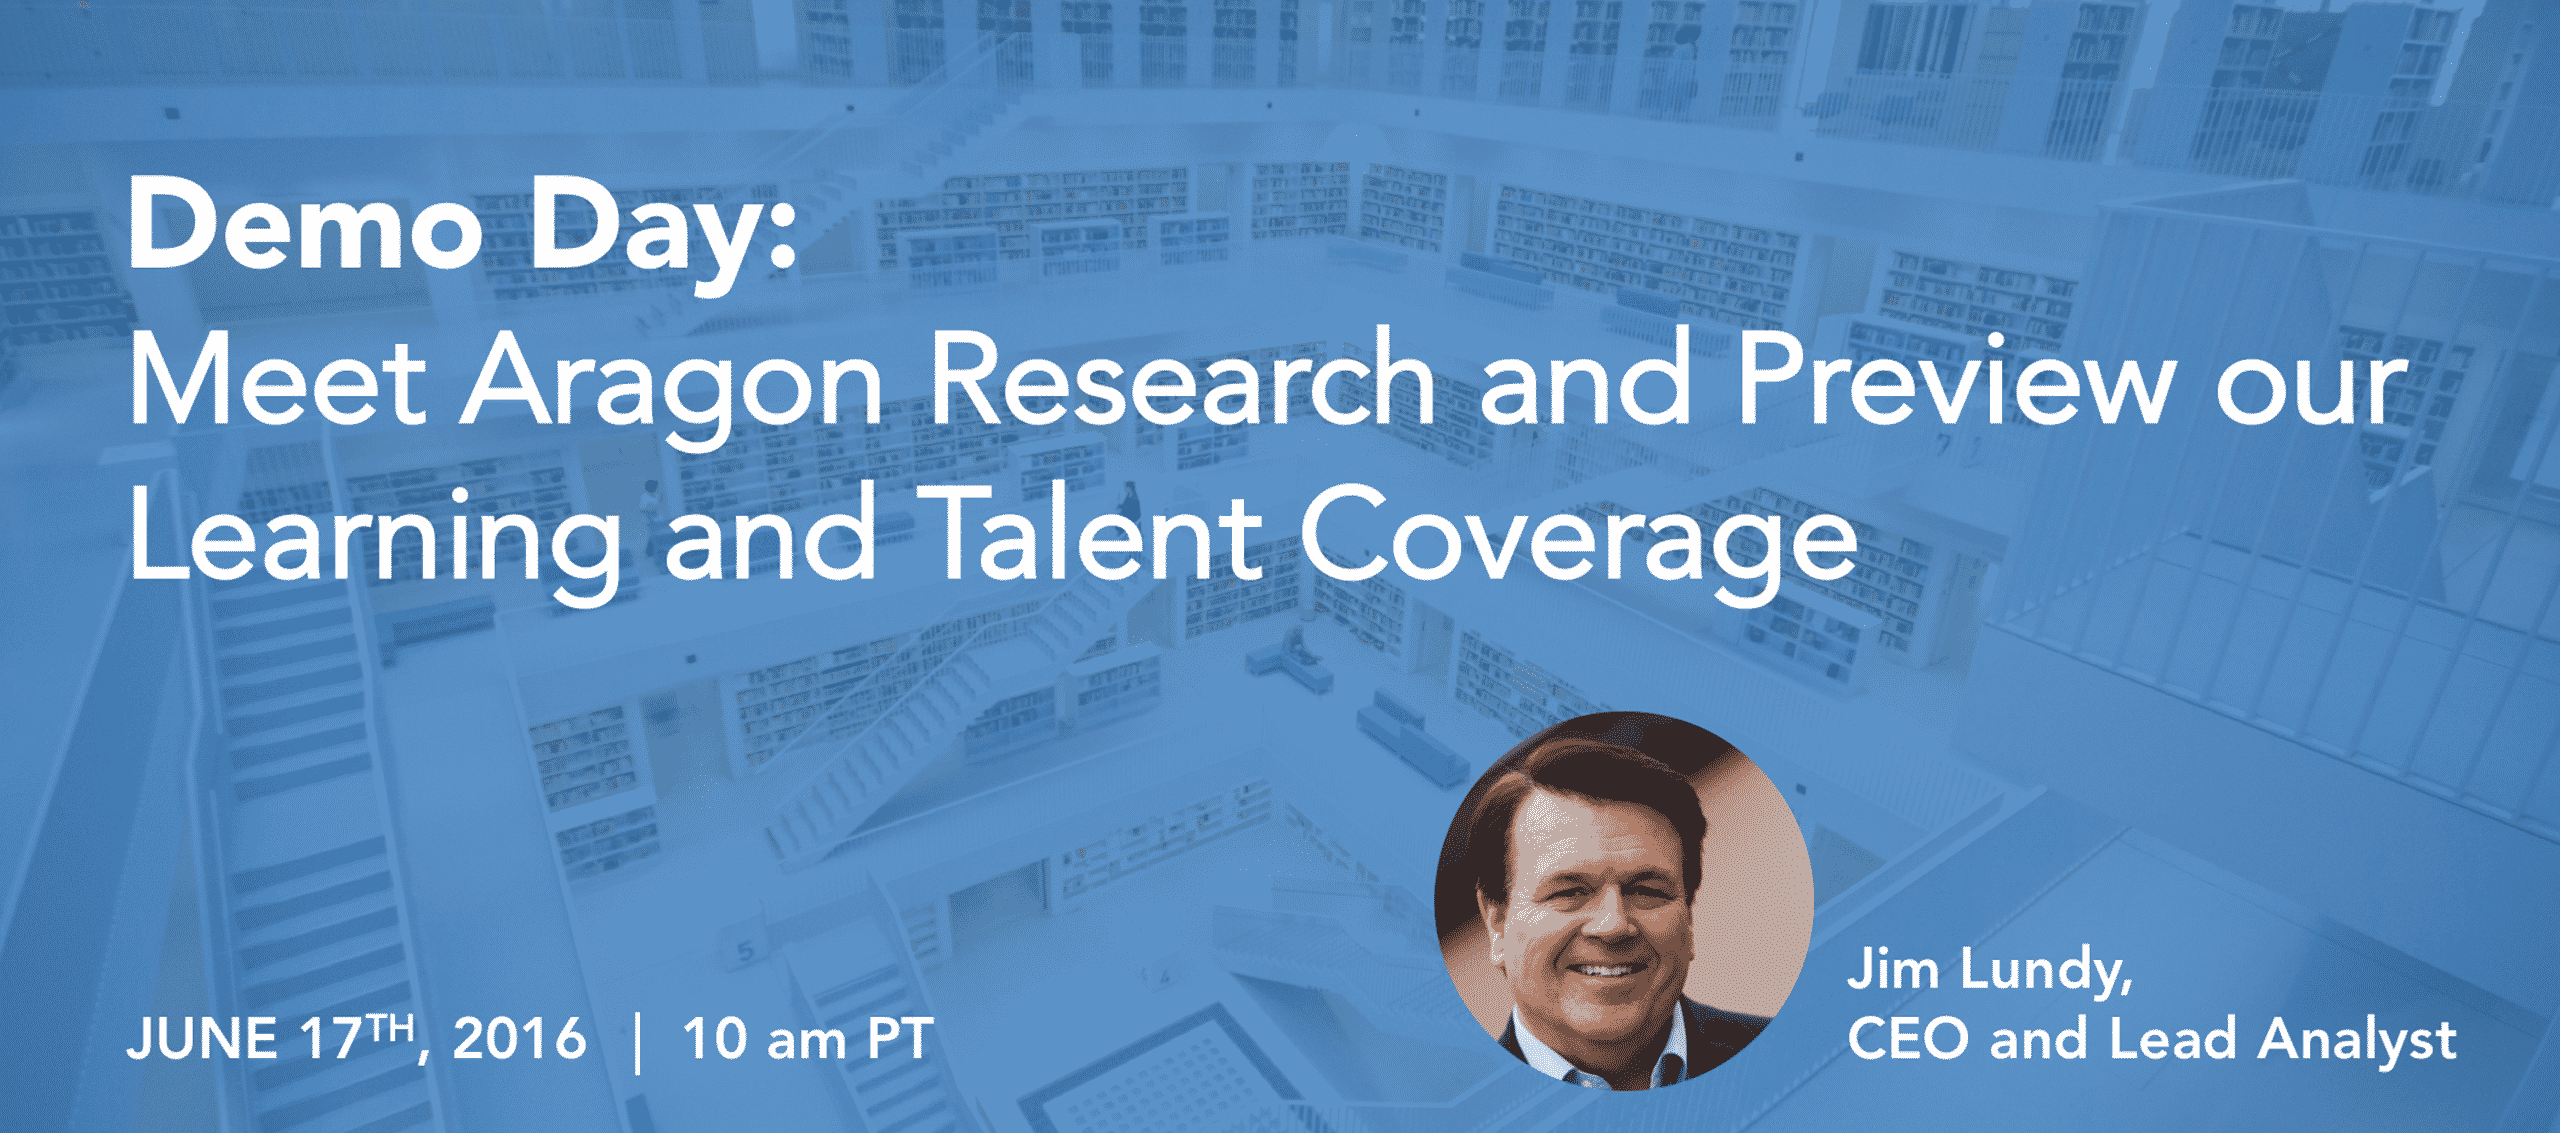 Demo Day Preview our Learning and Talent Coverage on June17th at 10 am PT - Corporate Learning - Aragon Research